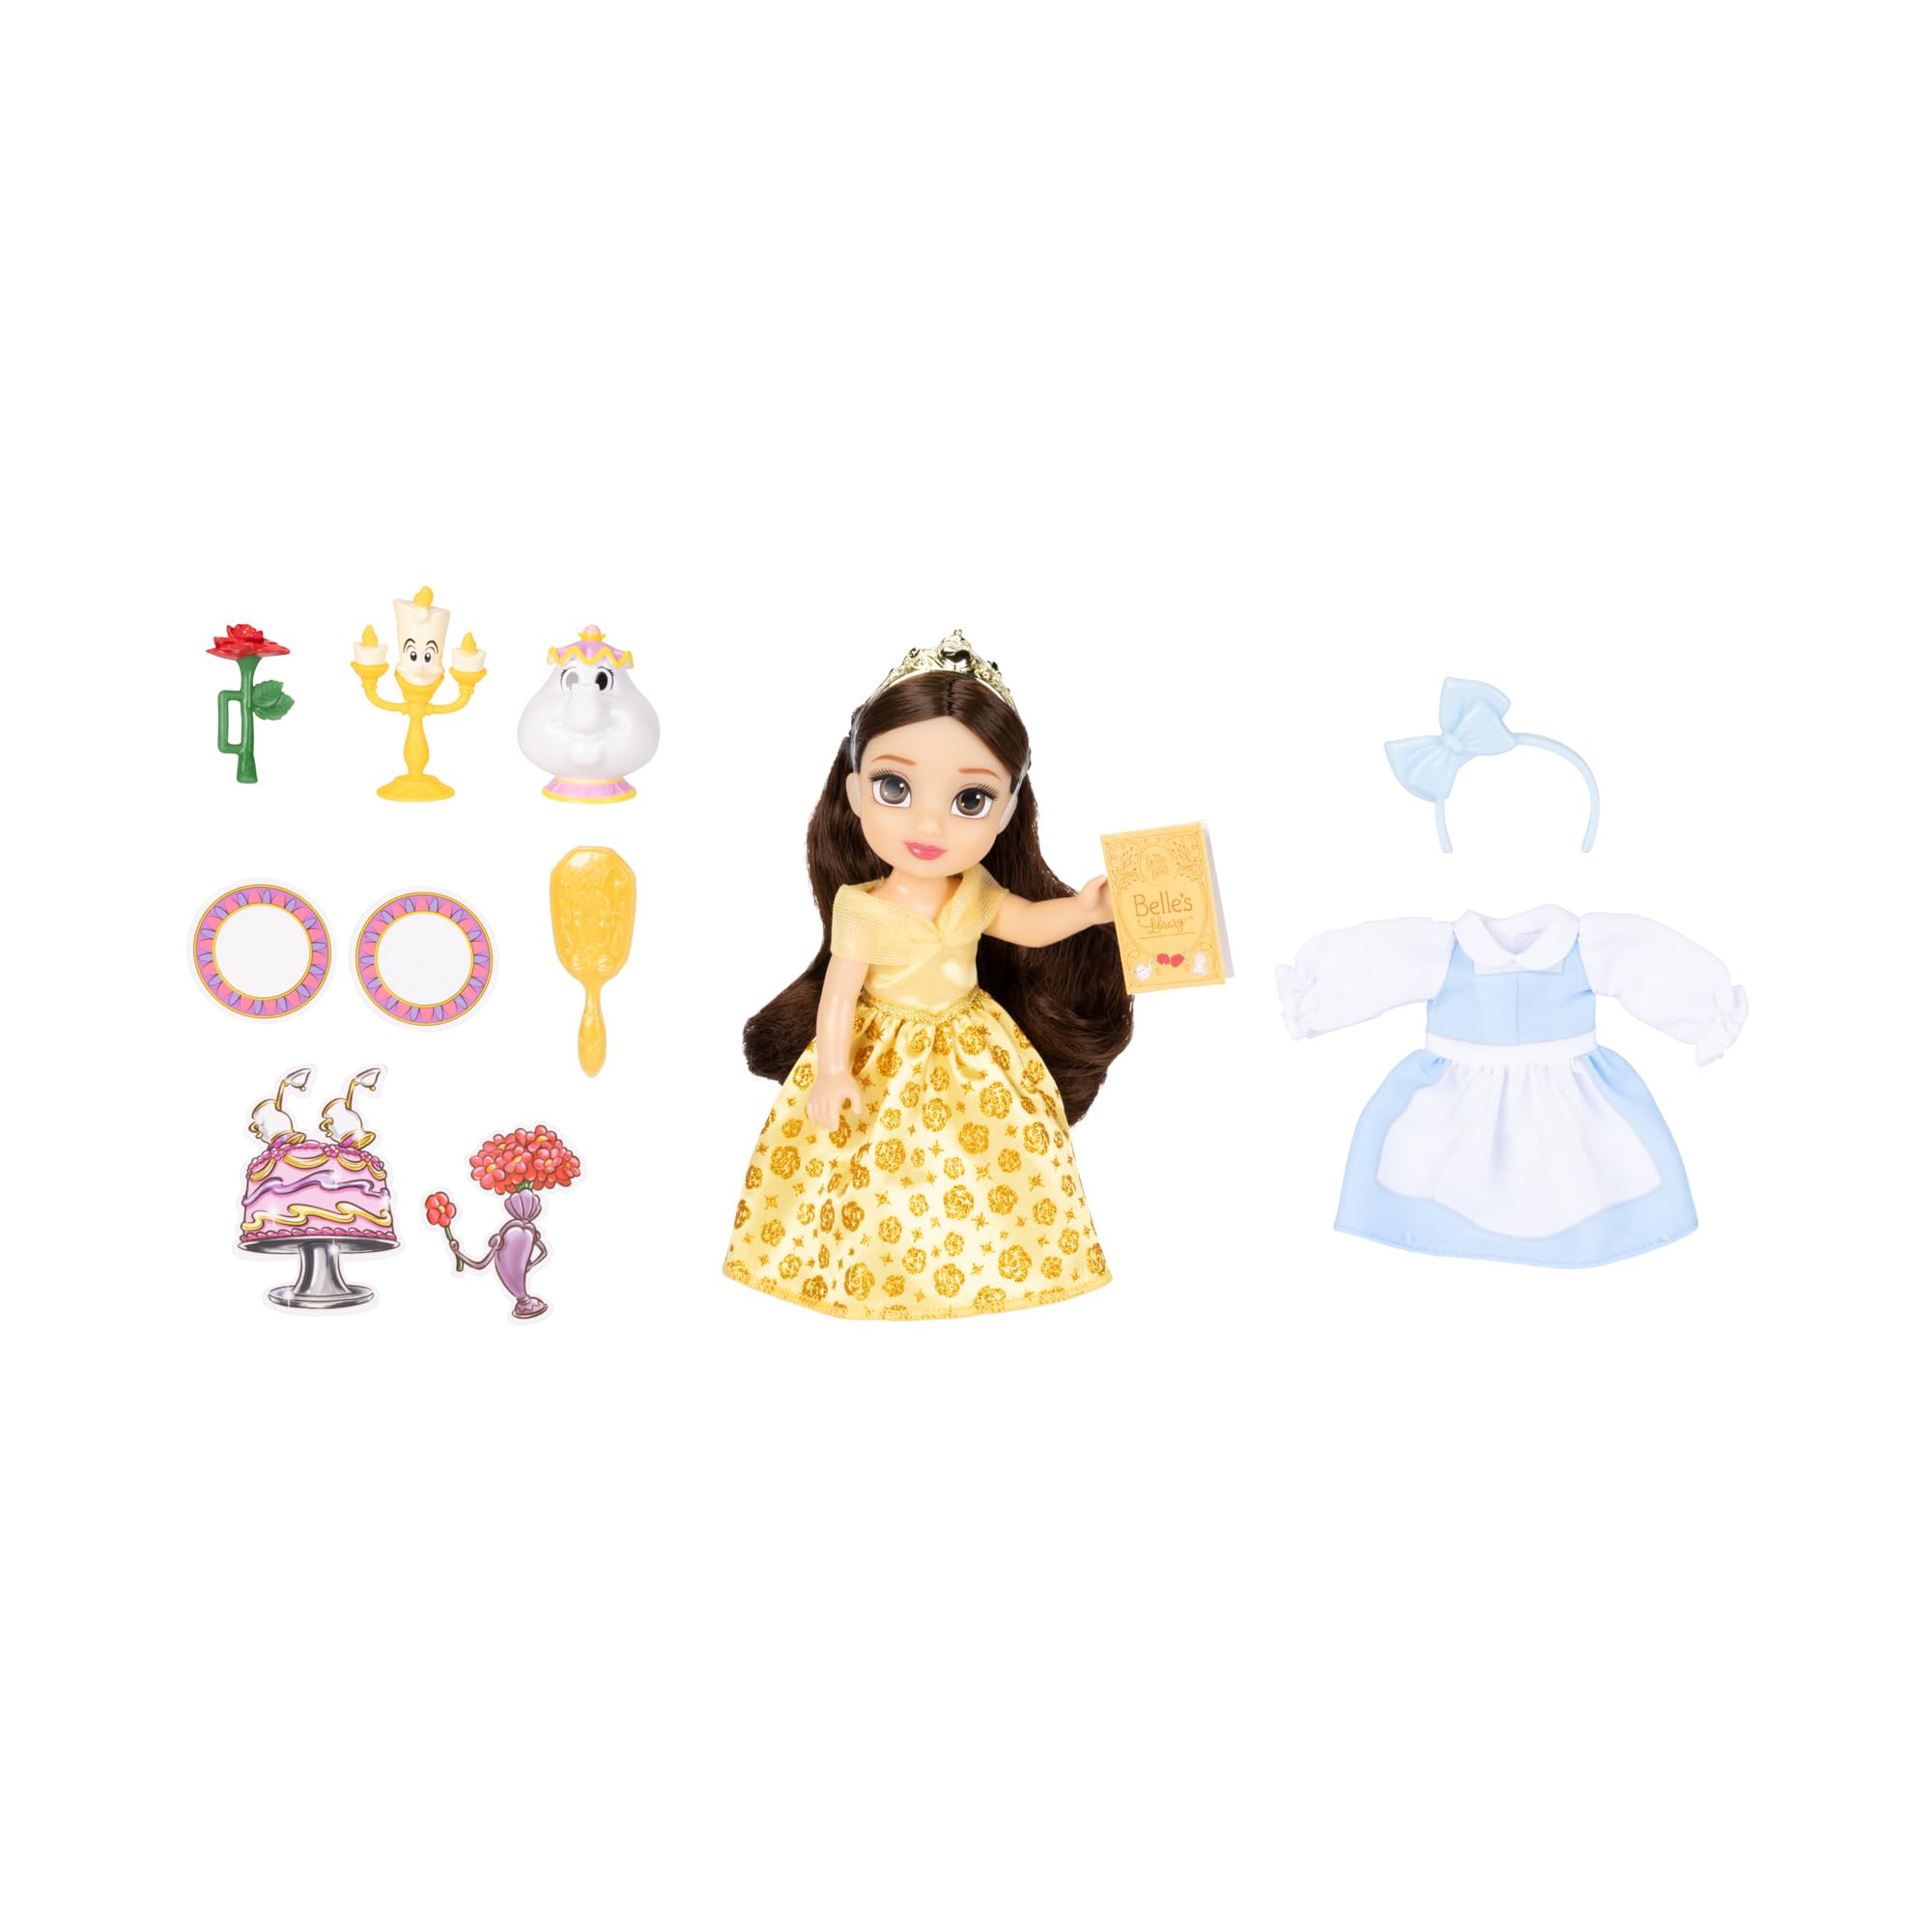 Disney Princess Belle Doll Be Our Guest Petite Belle Doll with Mrs. Potts & Lumiere, in Yellow Ball Gown and Blue Village Dress Fashions